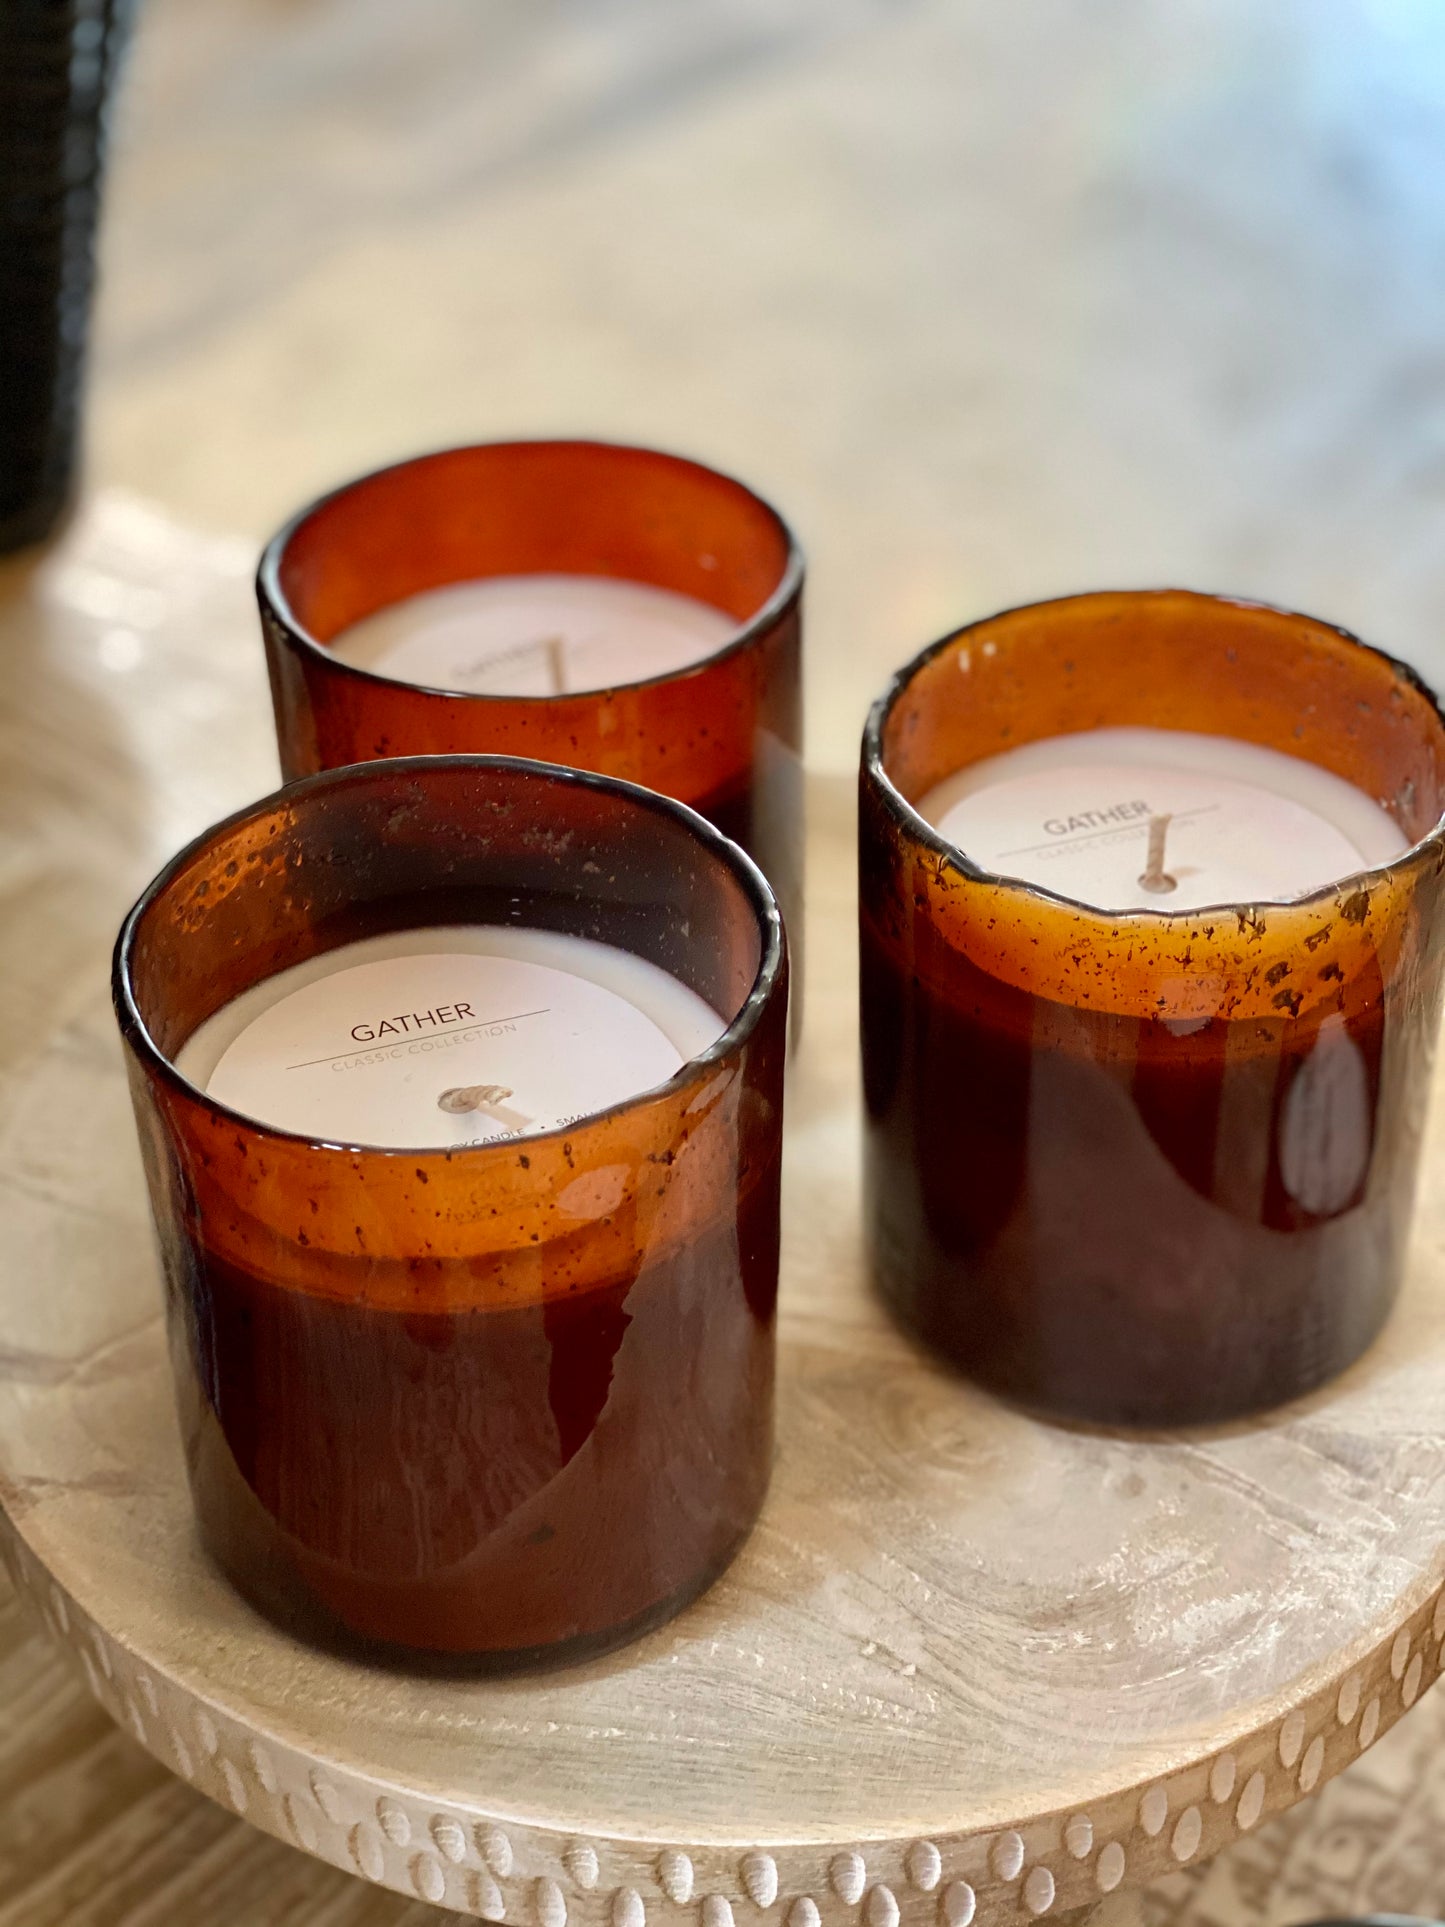 Amber Glass Candle